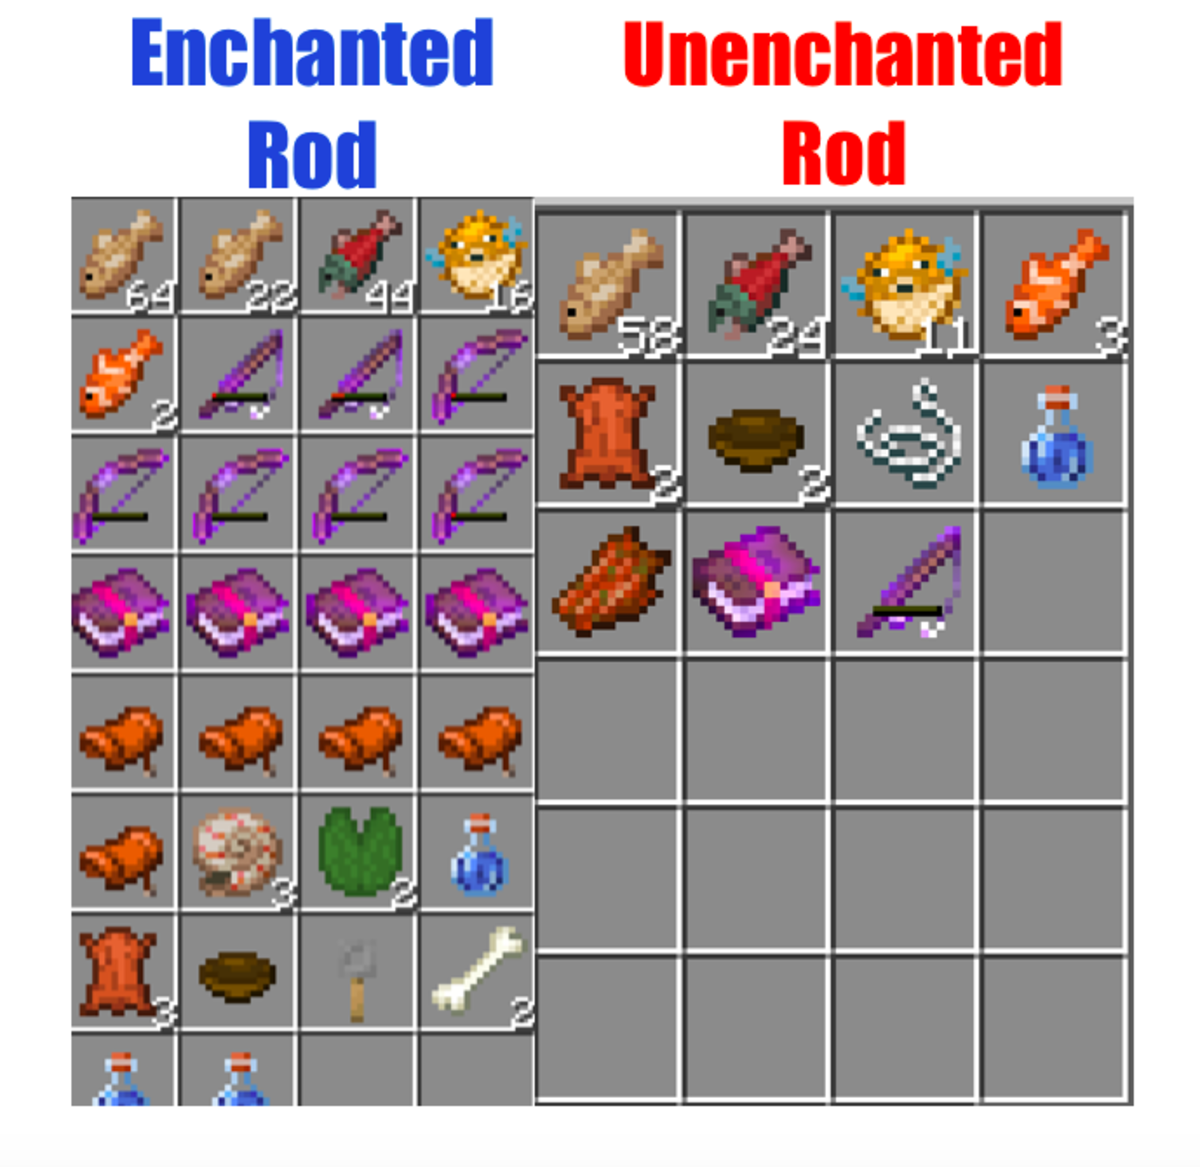 There are considerable benefits to using an enchanted fishing rod, as evidenced by this comparison of loot obtained from a 15 minute fishing session